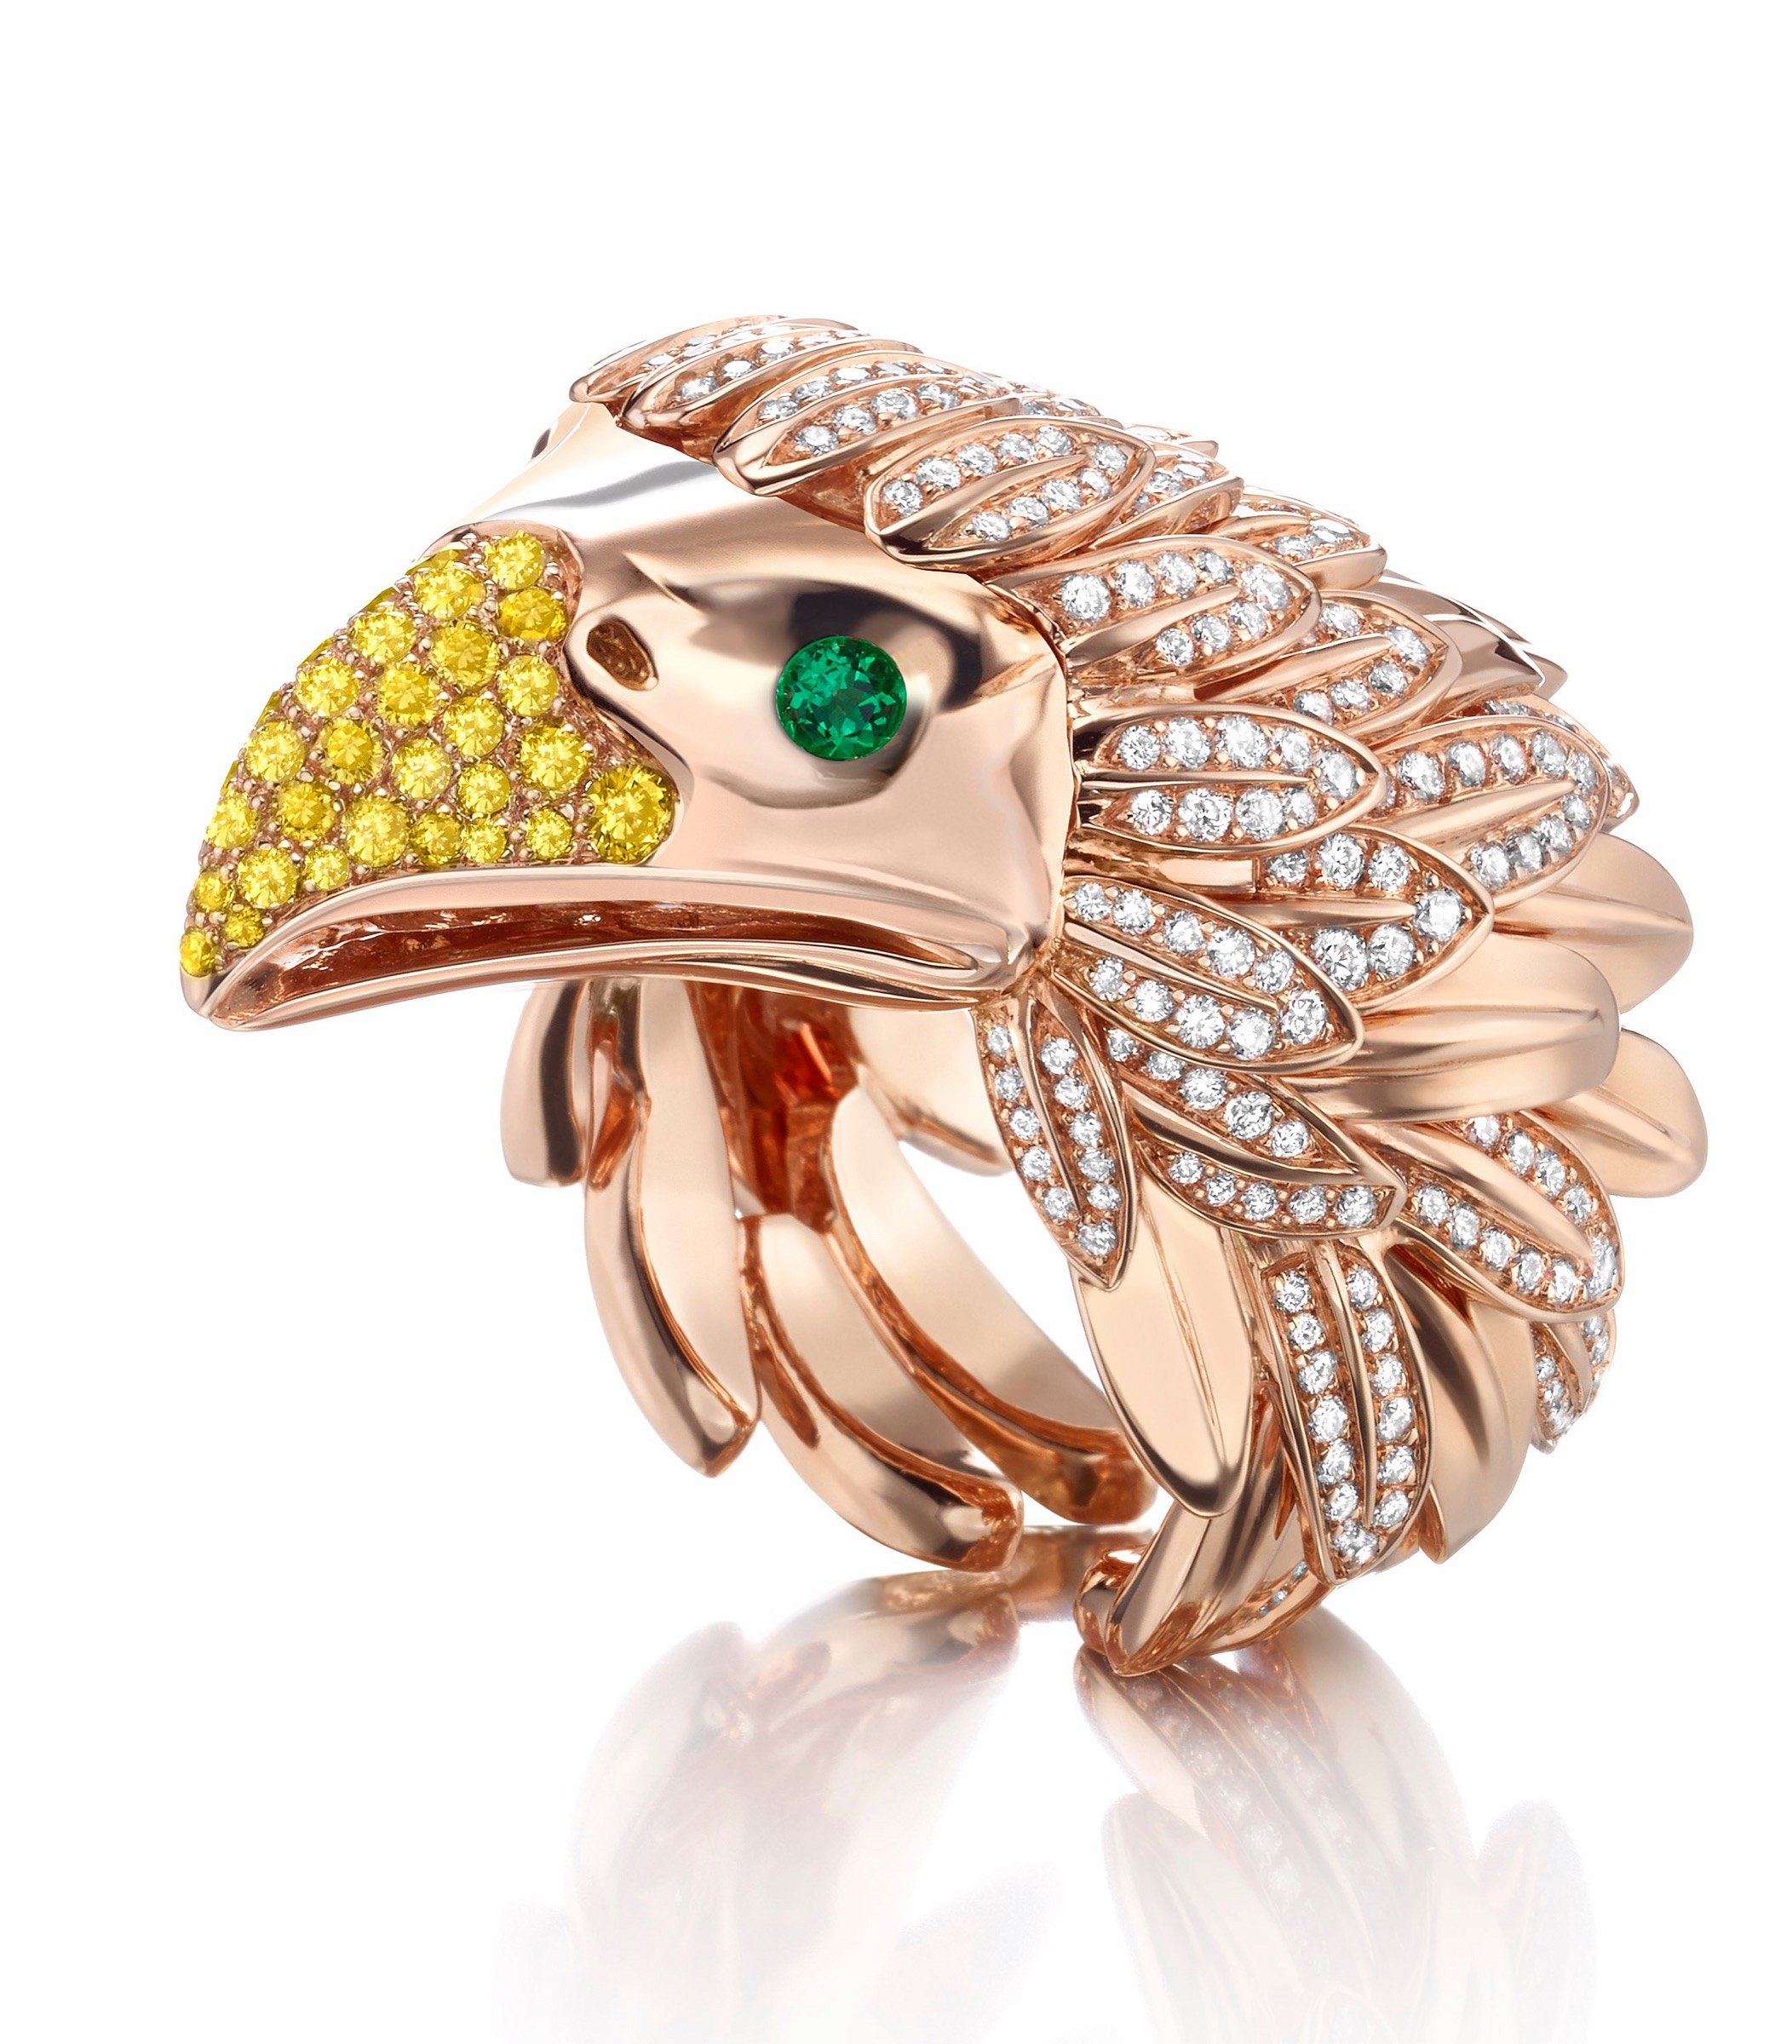 Interview with Jewelry Designer Nagib Tabbah - Exceptional Talent Meets ...